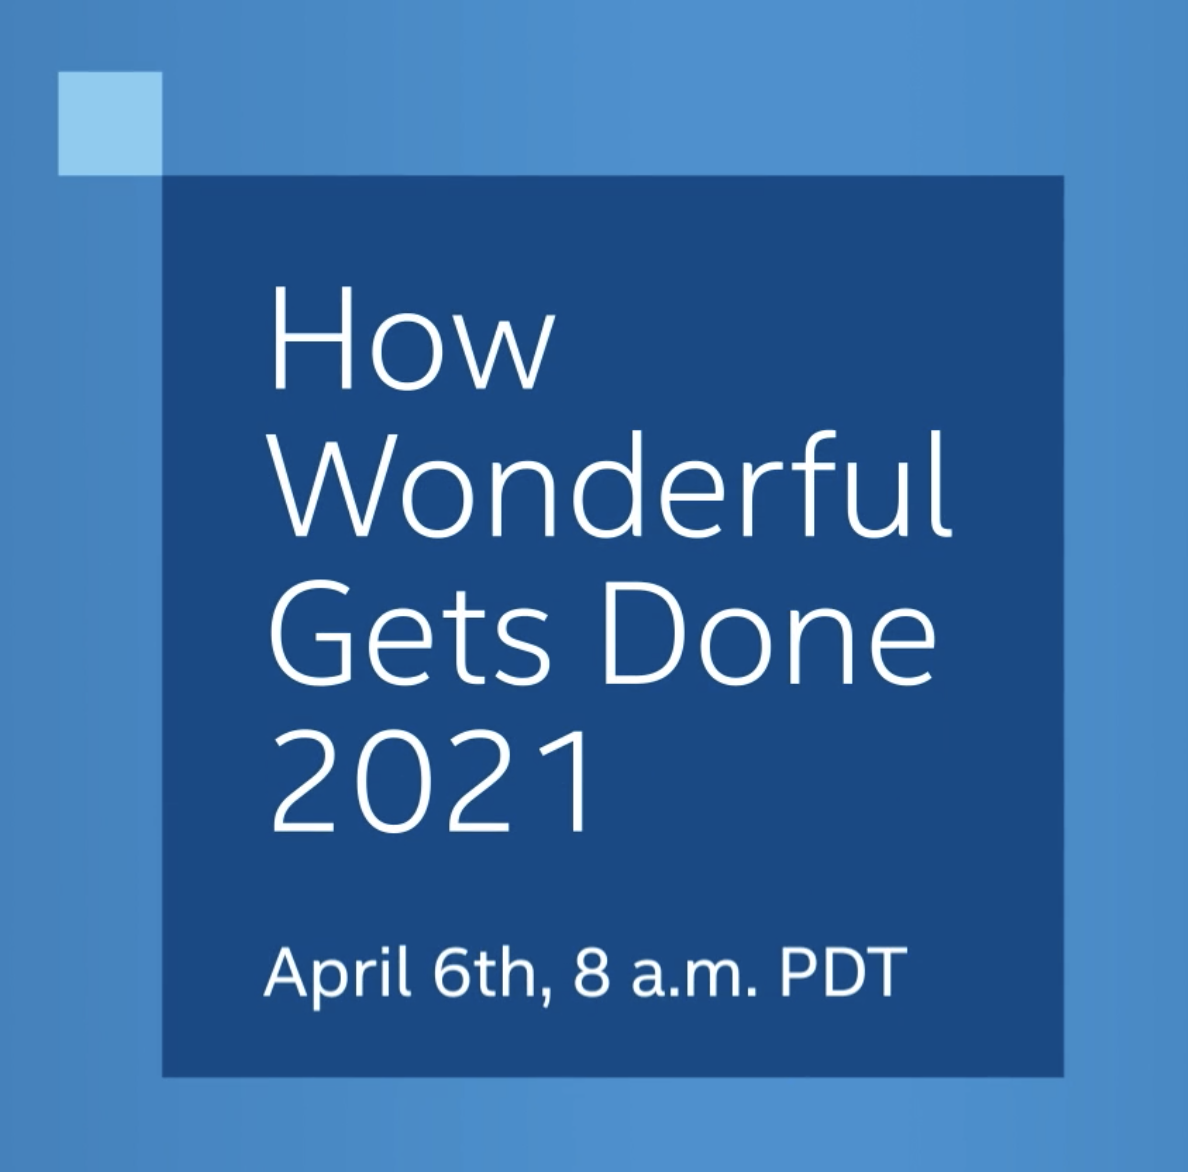 How Wonderful Gets Done 2021, April 6th, 8 a.m. PDT